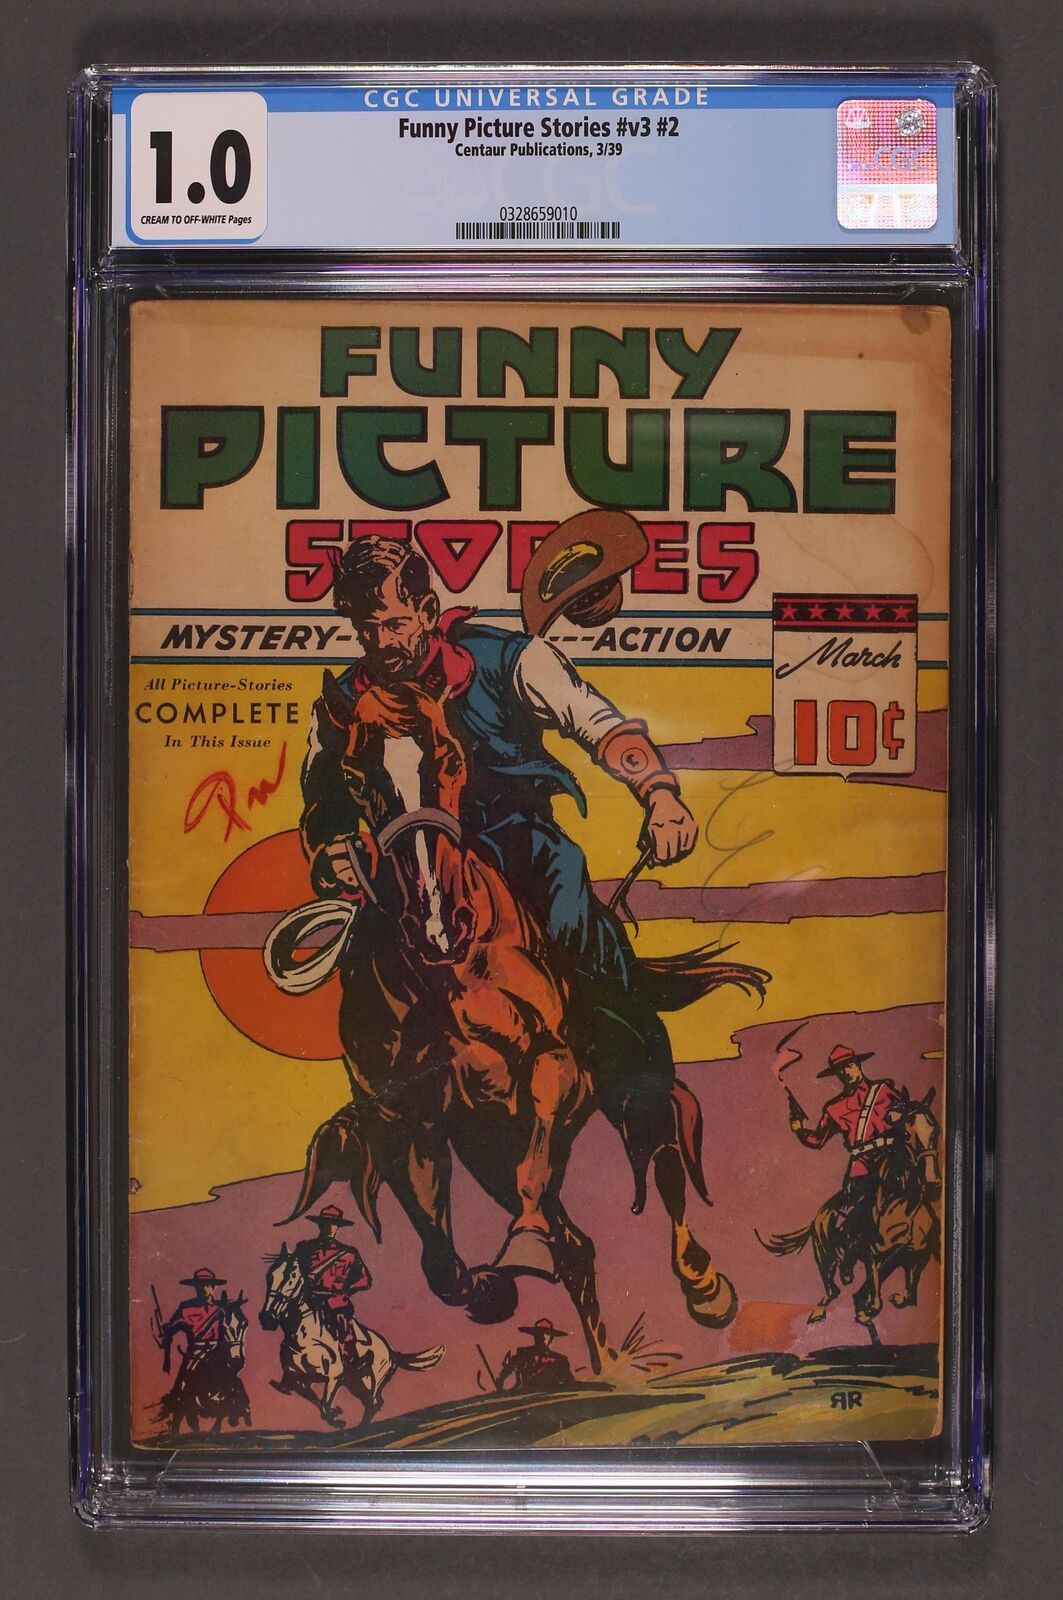 Funny Picture Stories Vol. 3 #2 CGC 1.0 1939 0328659010